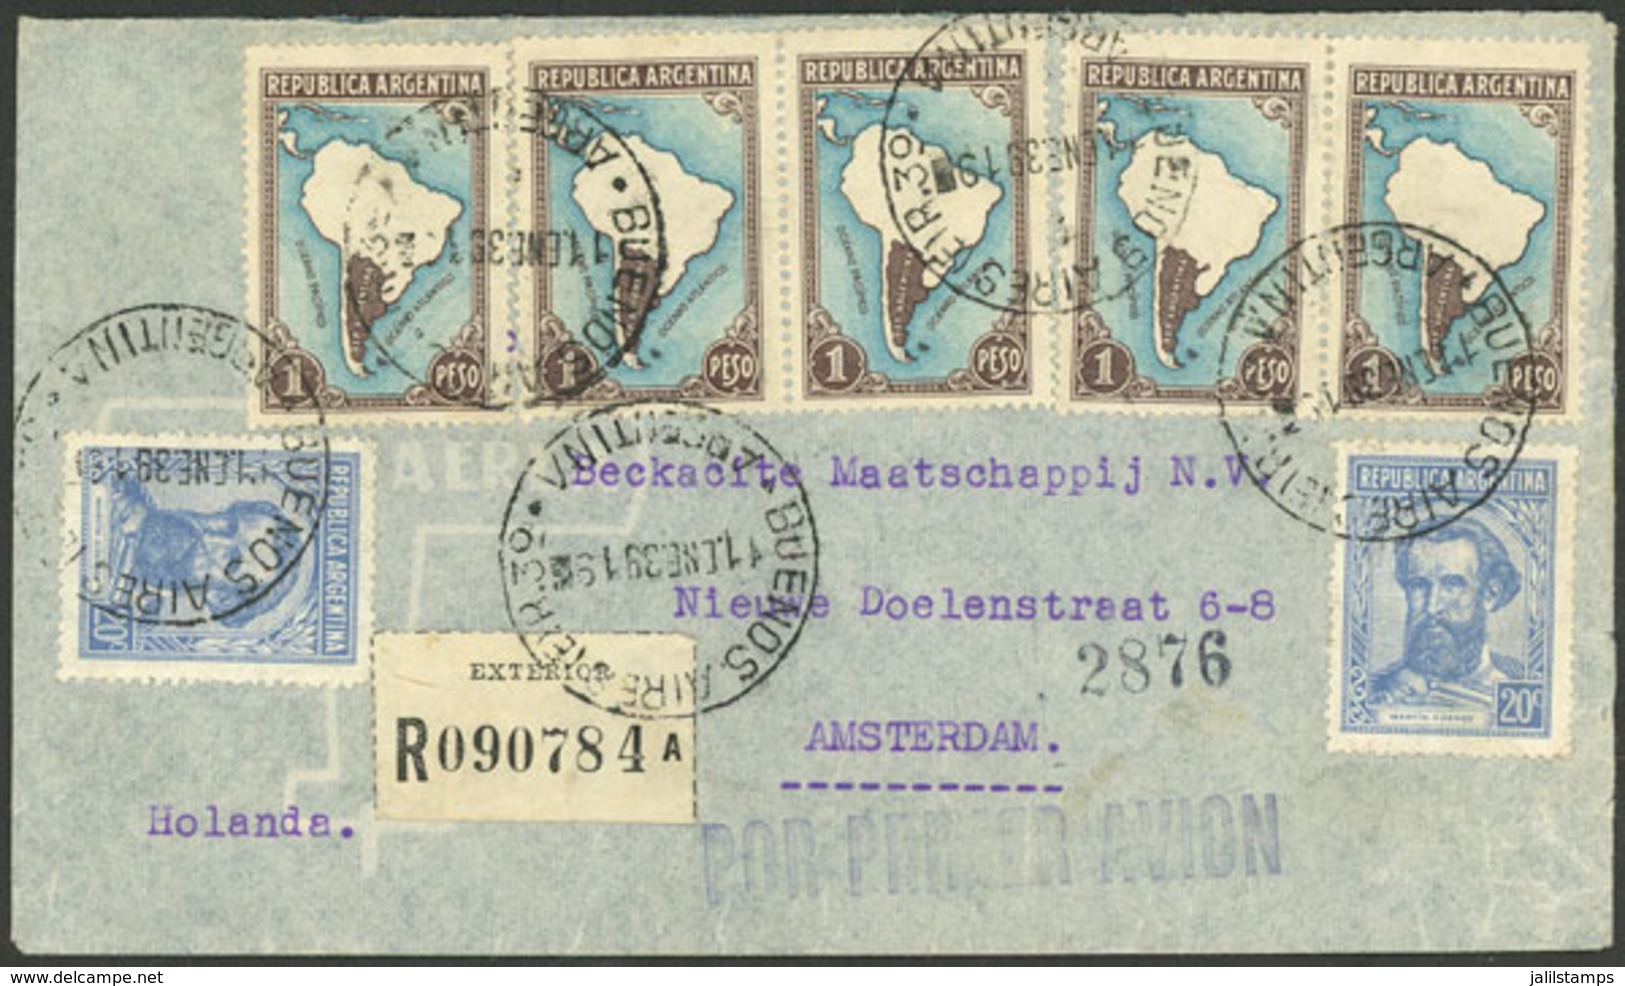 ARGENTINA: 11/JA/1939: Buenos Aires - Amsterdam, Registered Airmail Cover Franked With 2x 20c. Martín Güemes + 5x $1 Map - Briefe U. Dokumente